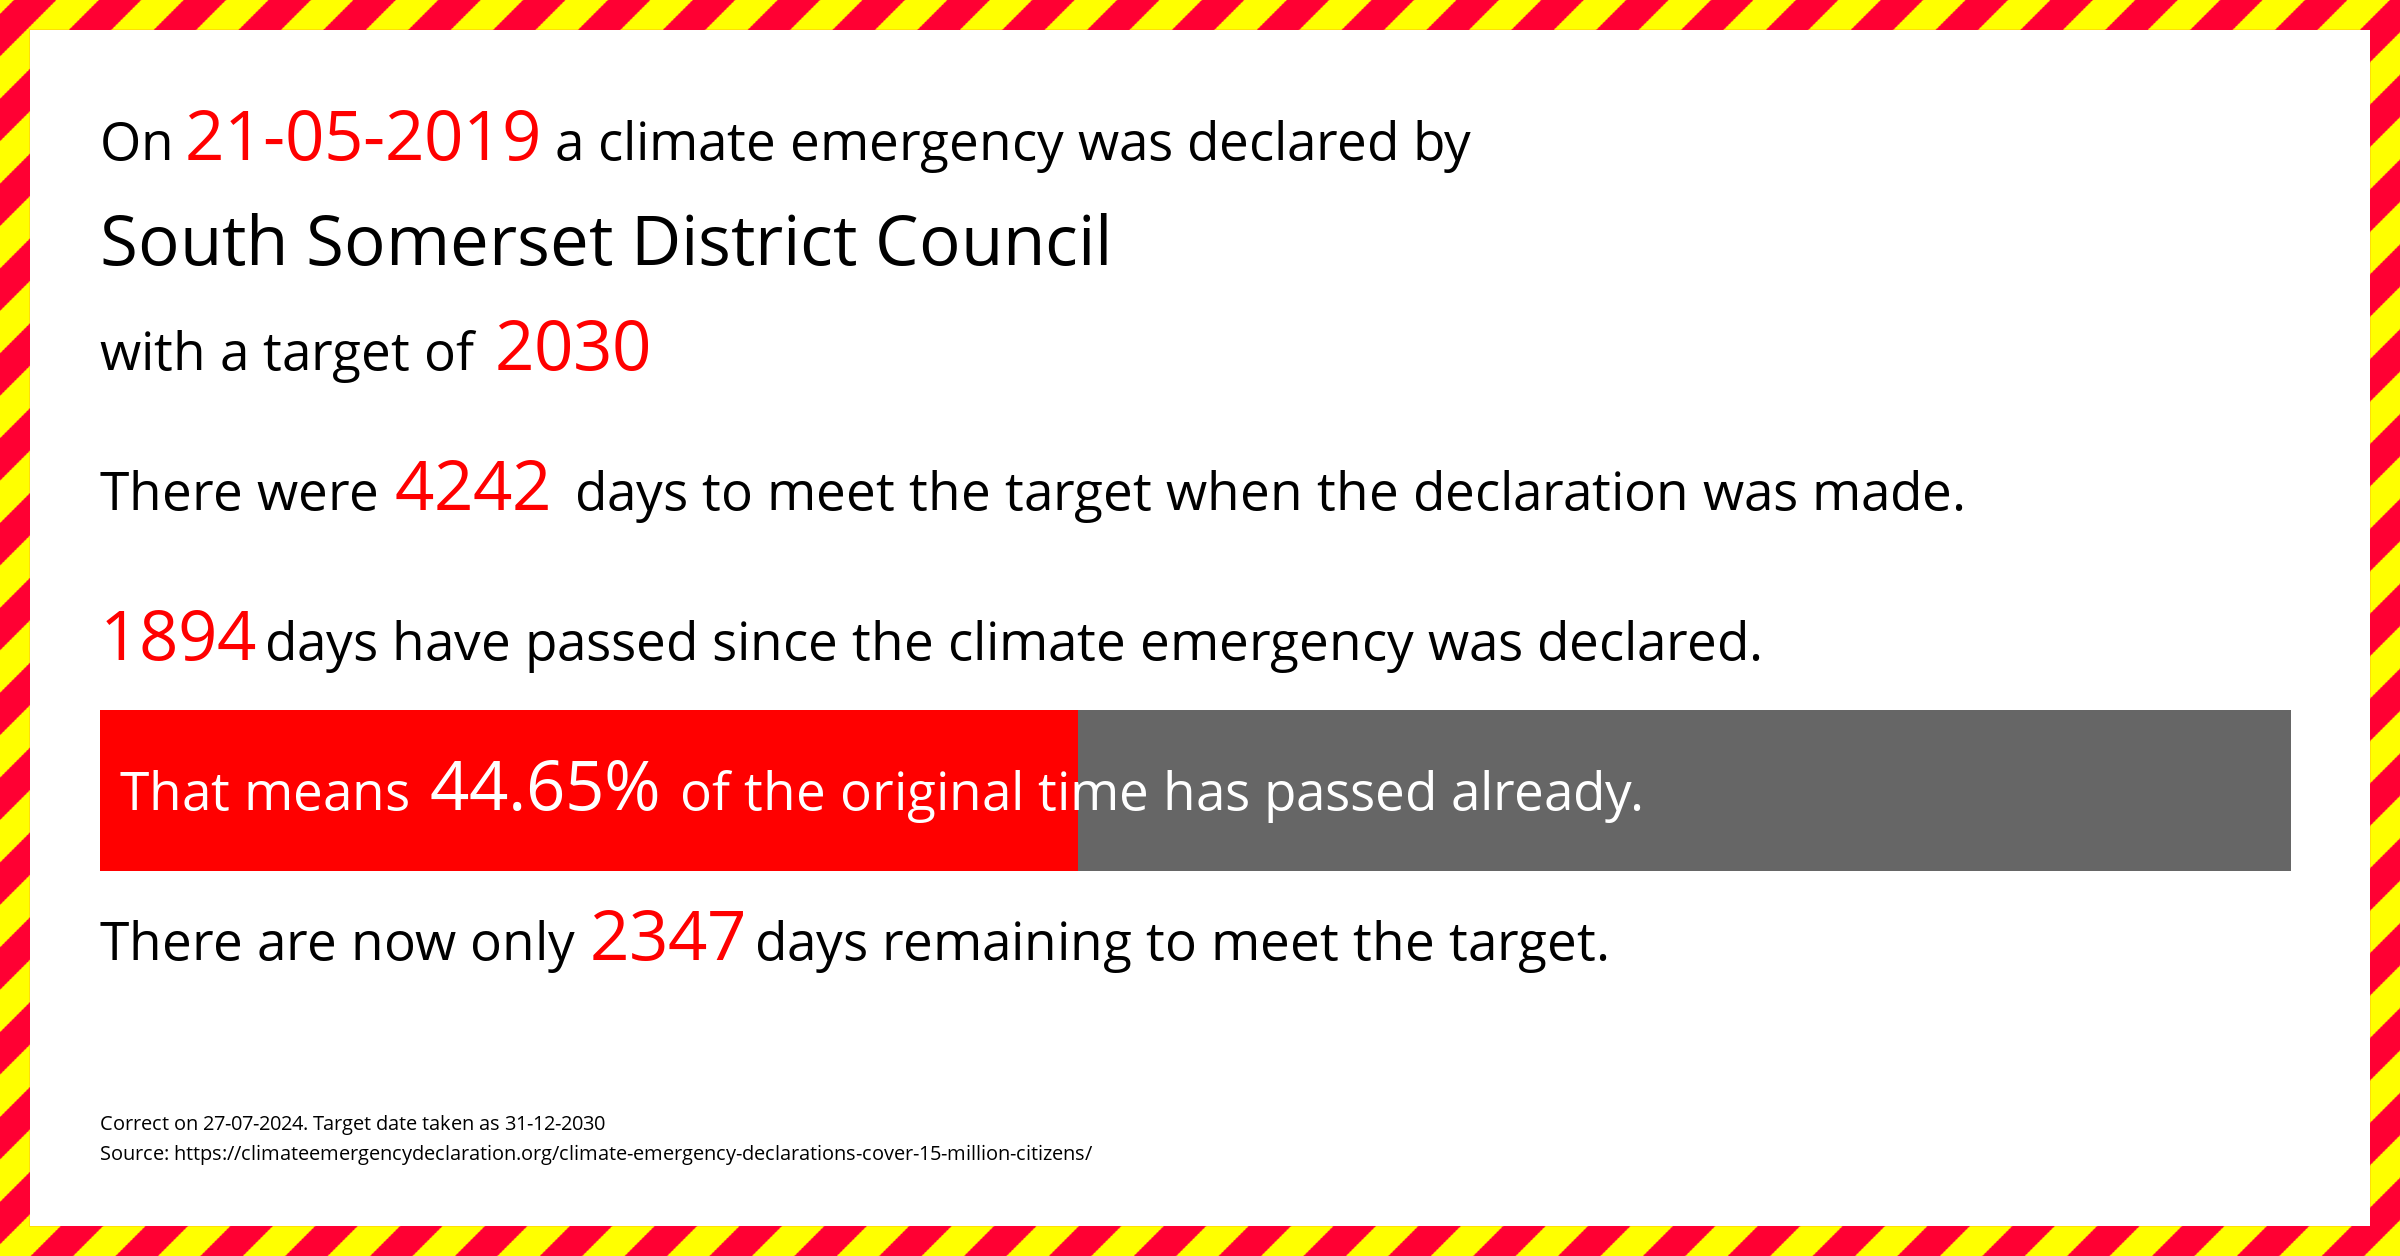 South Somerset District Council declared a Climate emergency on Tuesday 21st May 2019, with a target of 2030.